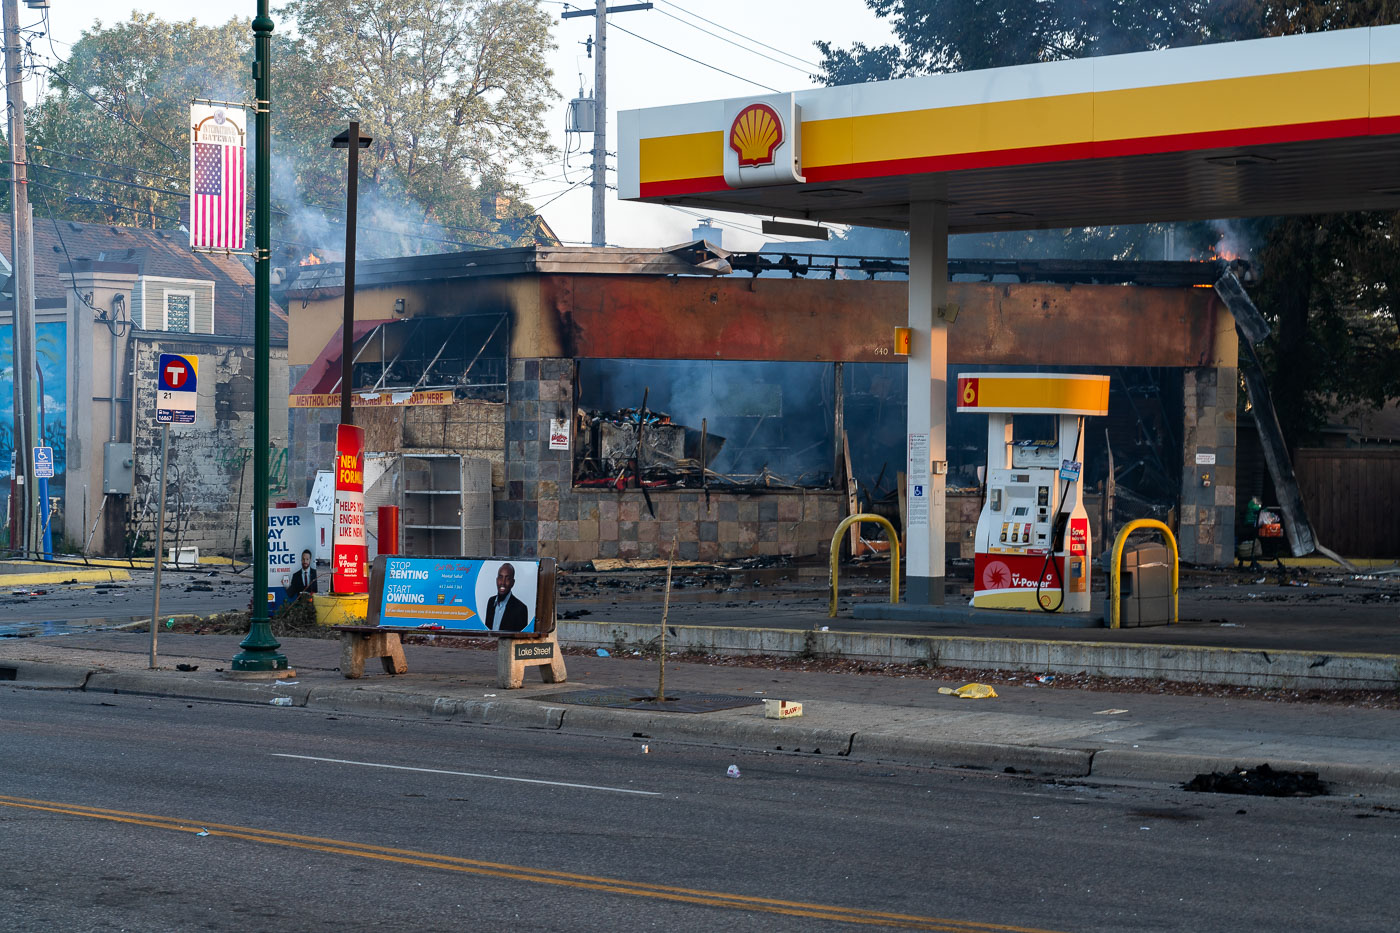 Shell gas station on fire on Lake Street as day breaks